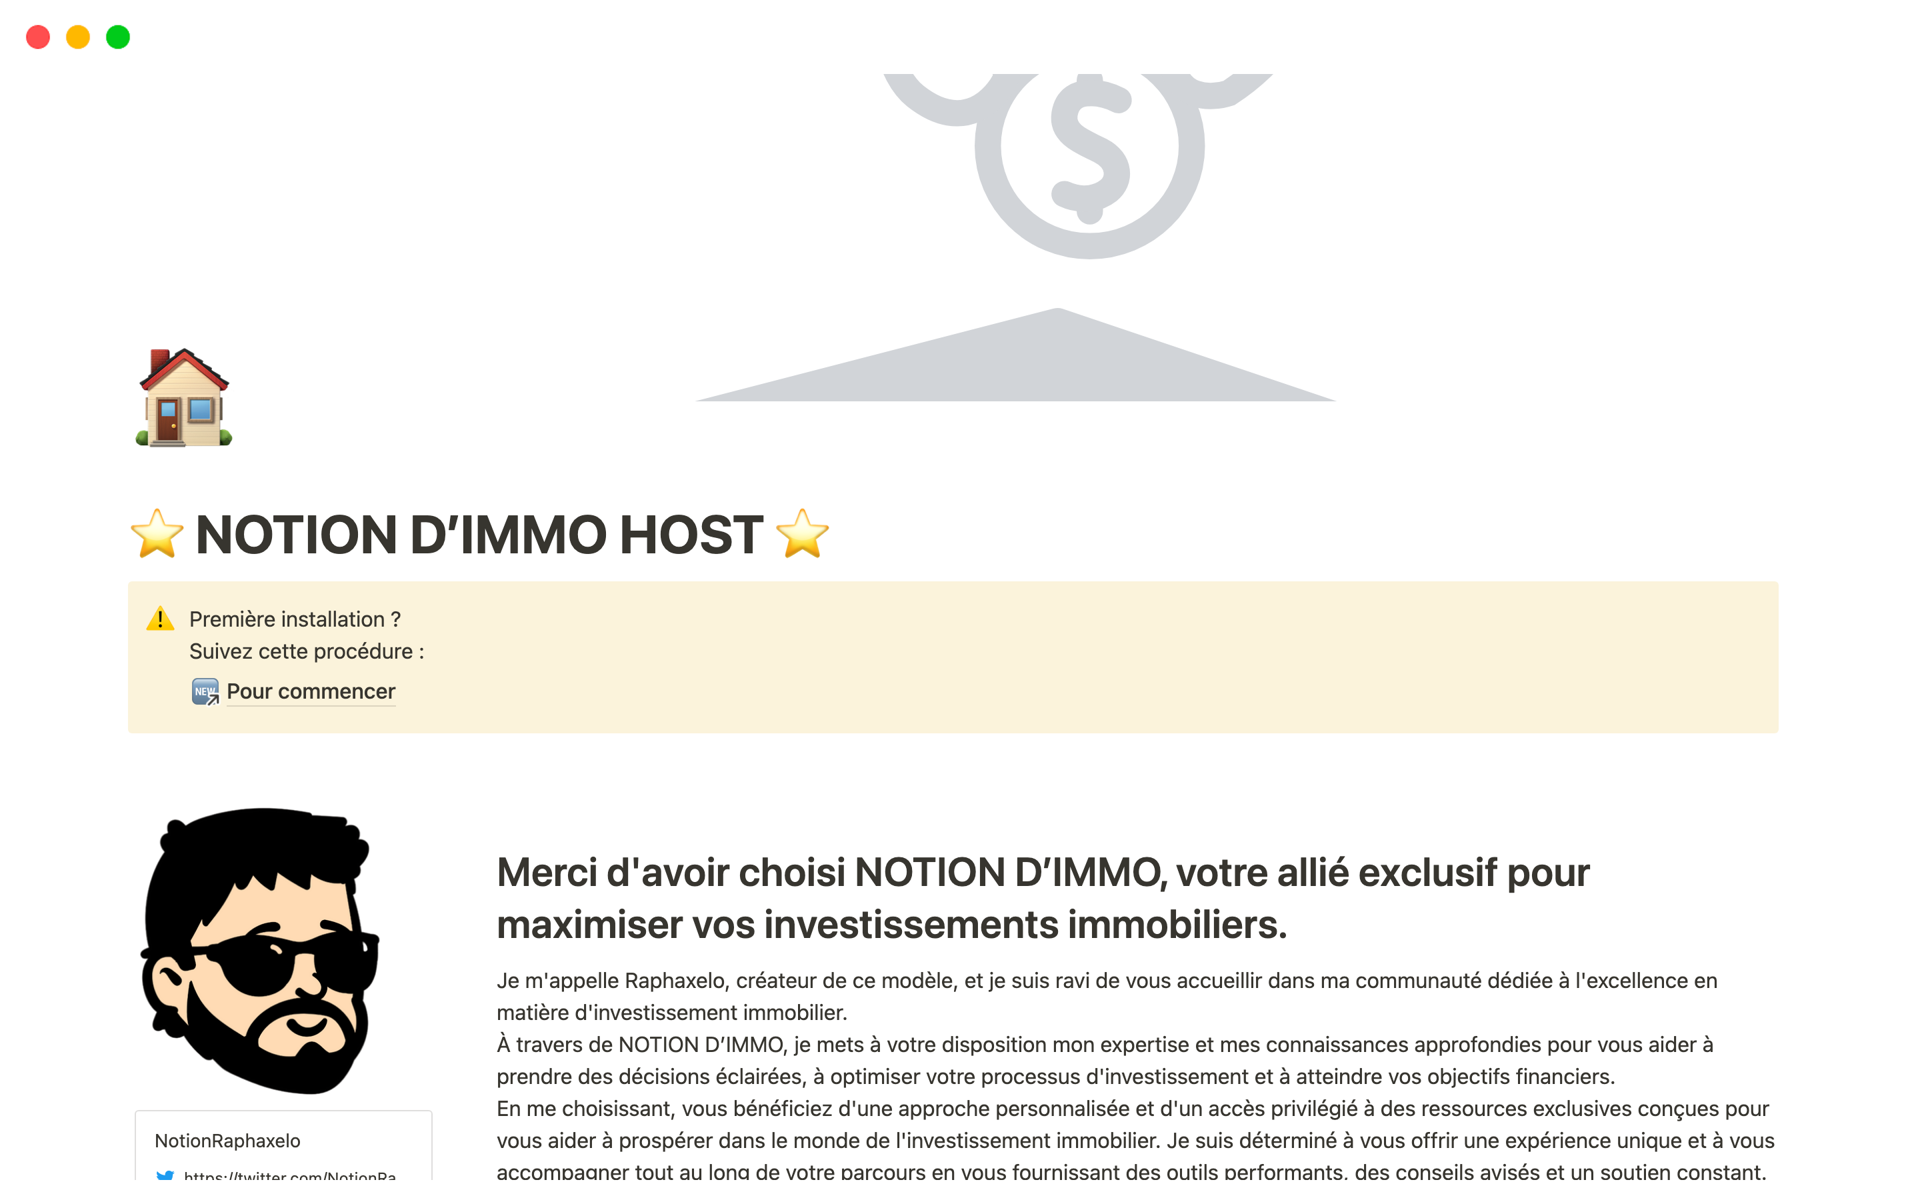 A template preview for NOTION D’IMMO HOST